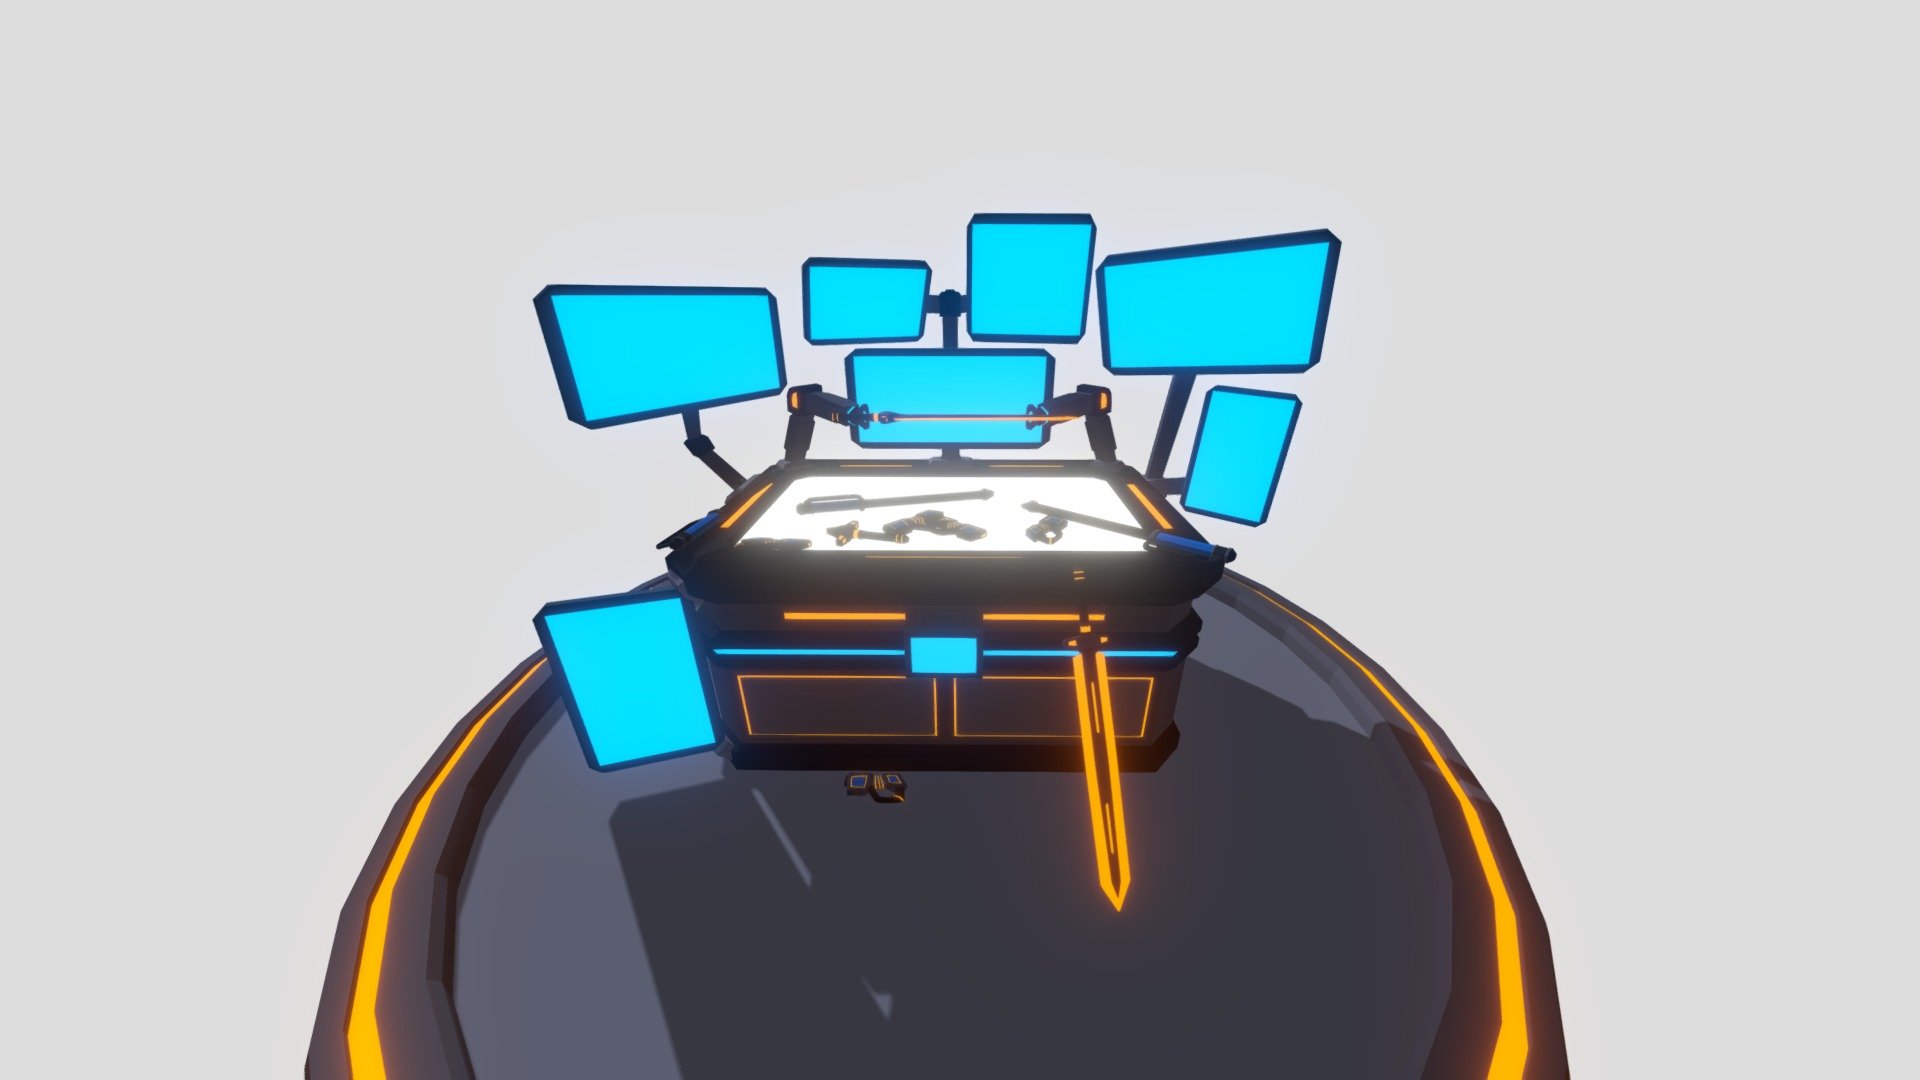 Little Project I worked on for a Game Jam with some mates. The theme was Oversaturation so I decided to make a table with too many screens, covered with lights and littered with weapons 3d model